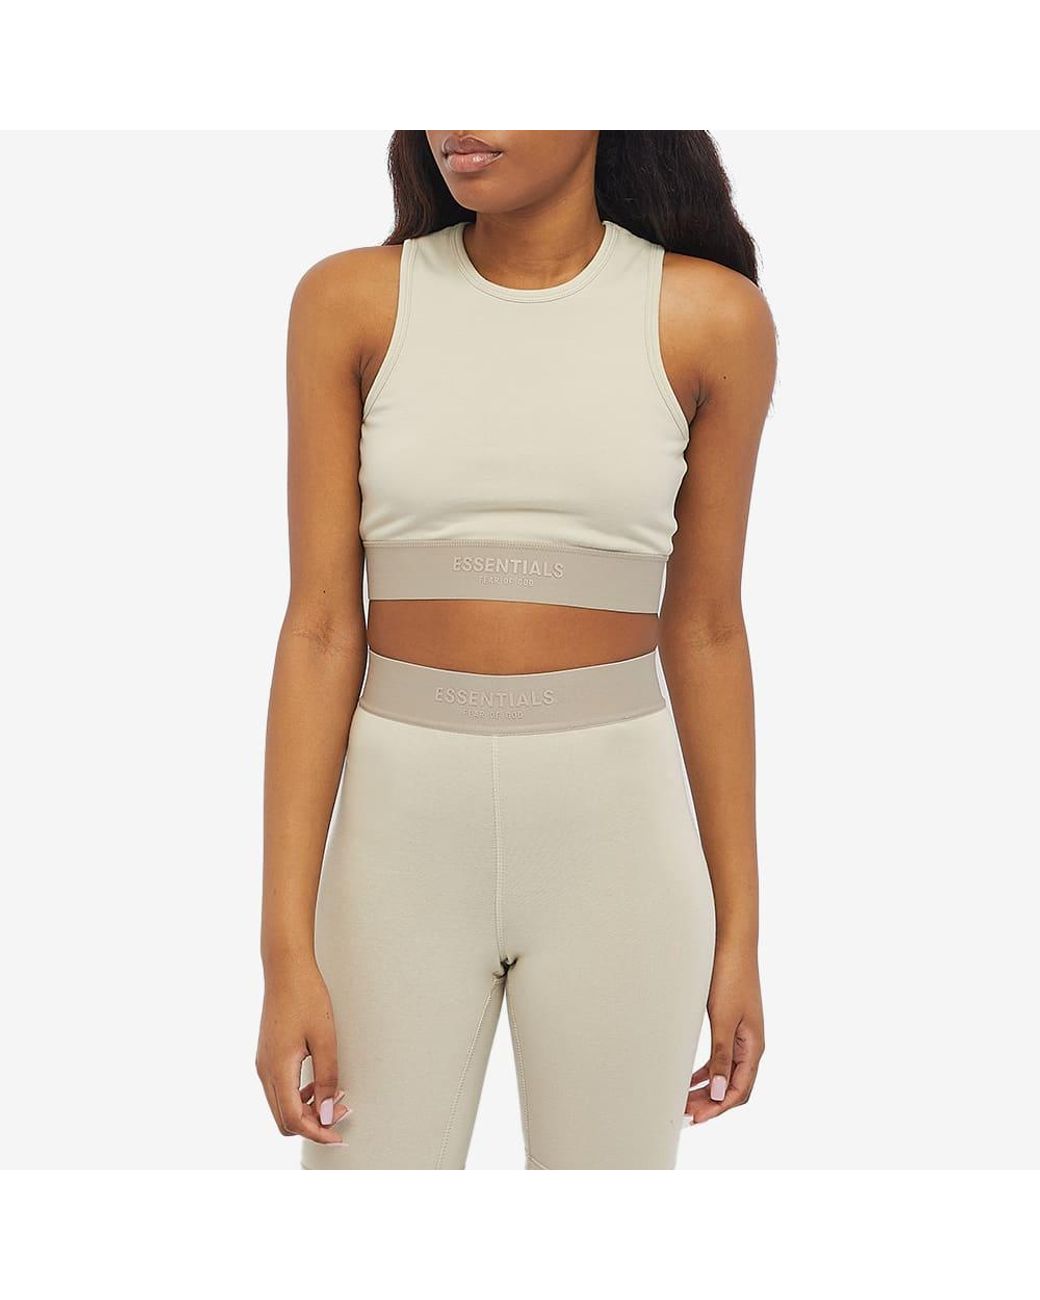 Fear Of God Sports Bra in Natural